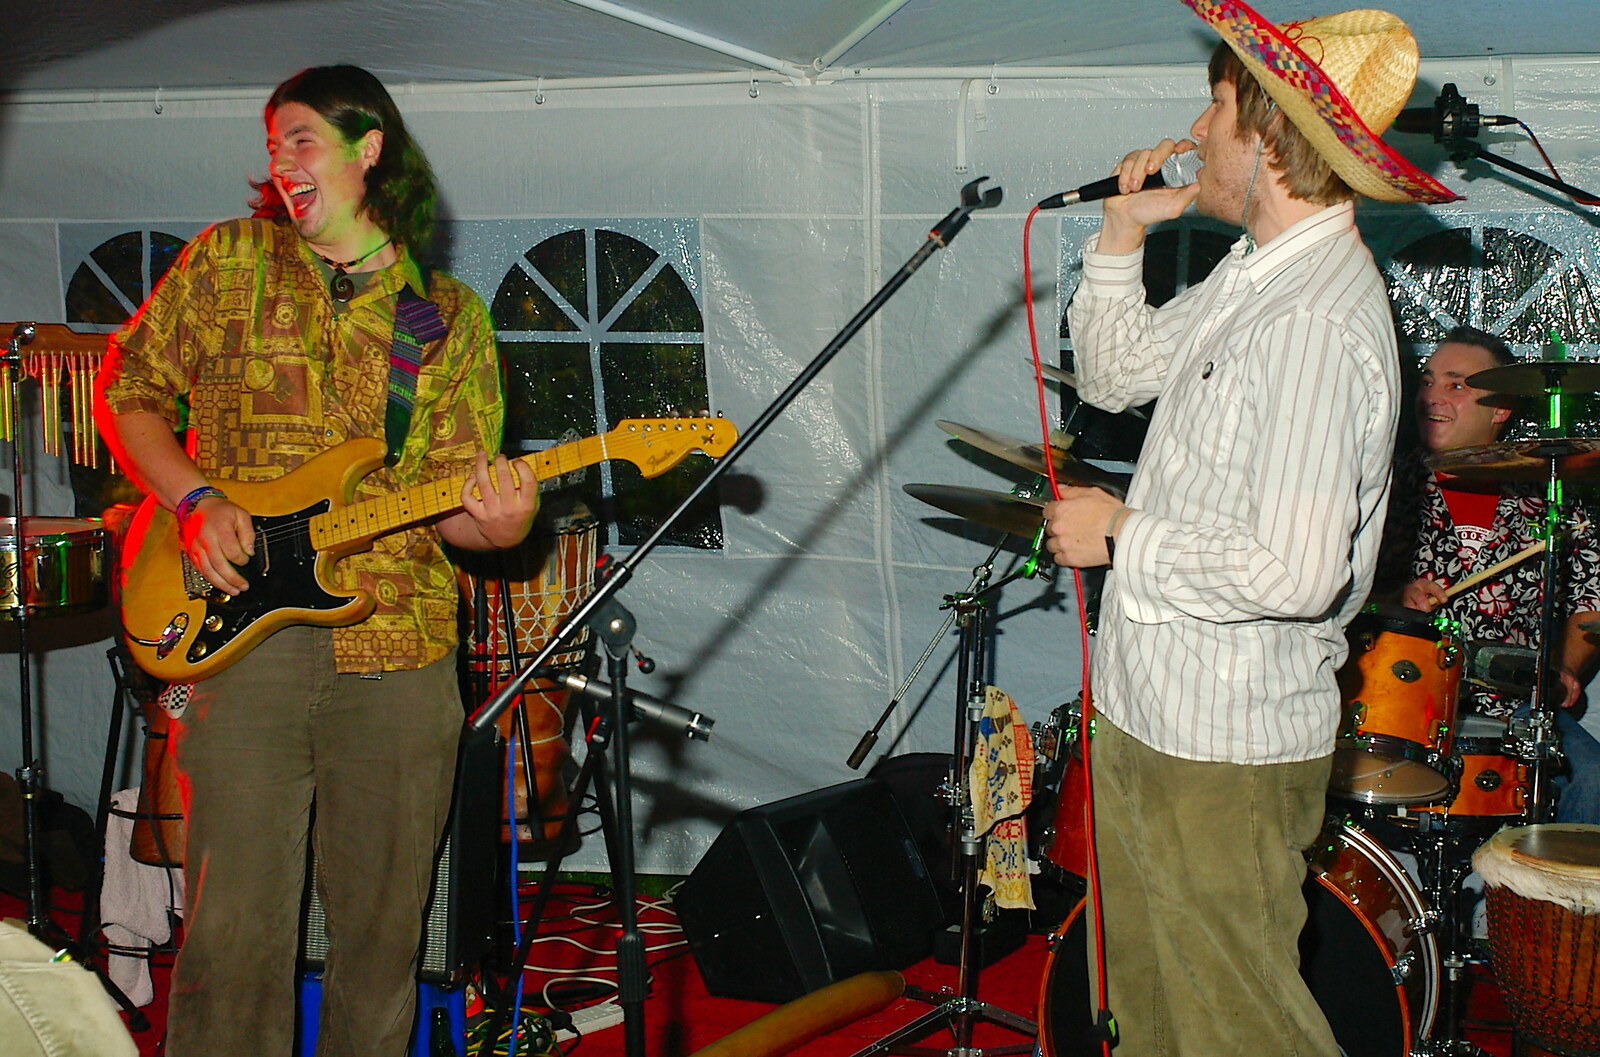 Jo and Steph's Party, Burston, Norfolk - 30th September 2005: Tom Folkard on the mic